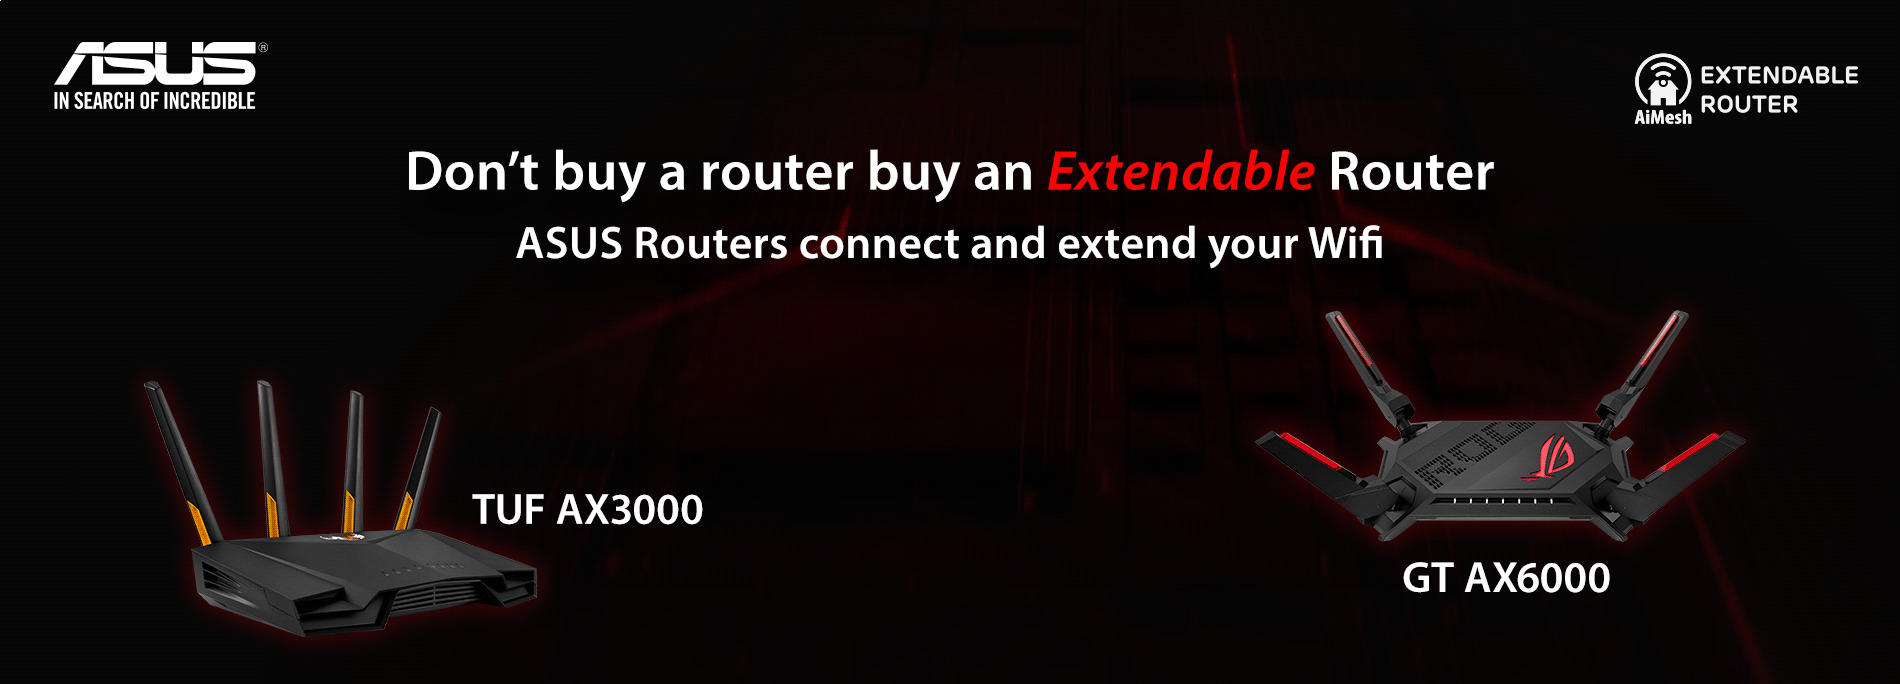 Upgrade Your Wi-Fi with ASUS Extendable Routers!